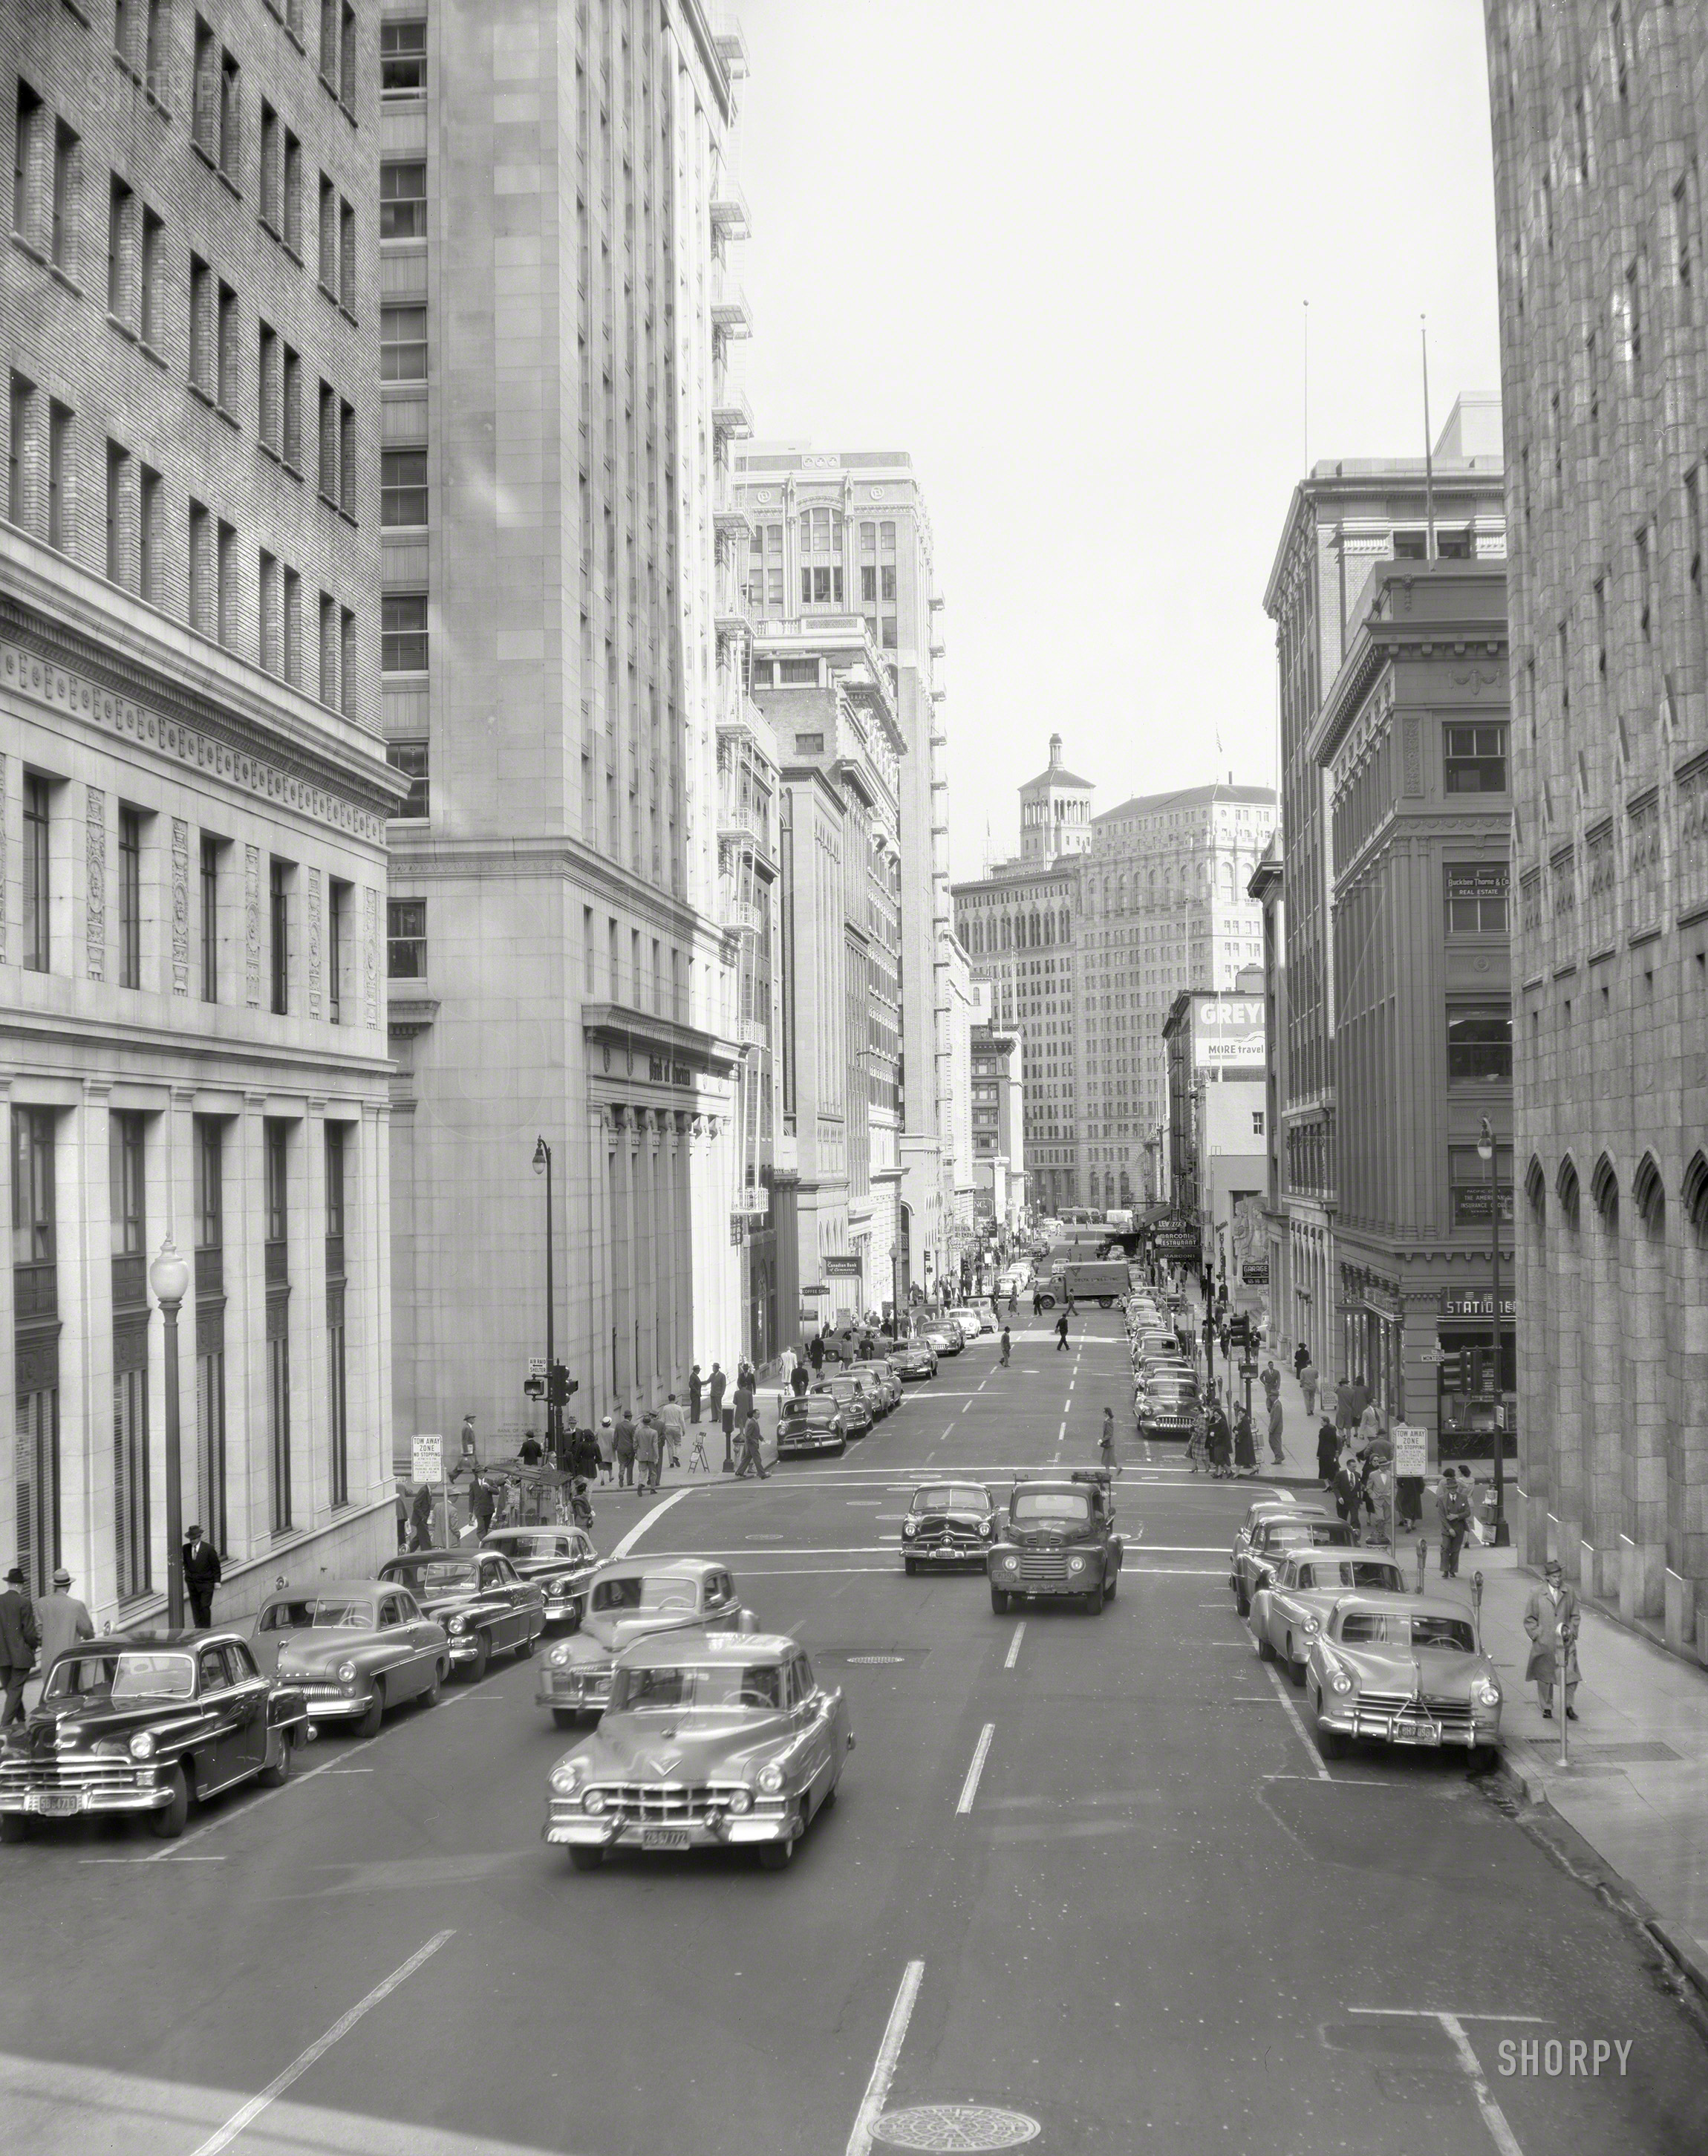 1952. "Pine Street at Montgomery, San Francisco." Looking toward the Matson and PG&E buildings on Market Street. 8x10 acetate negative. View full size.